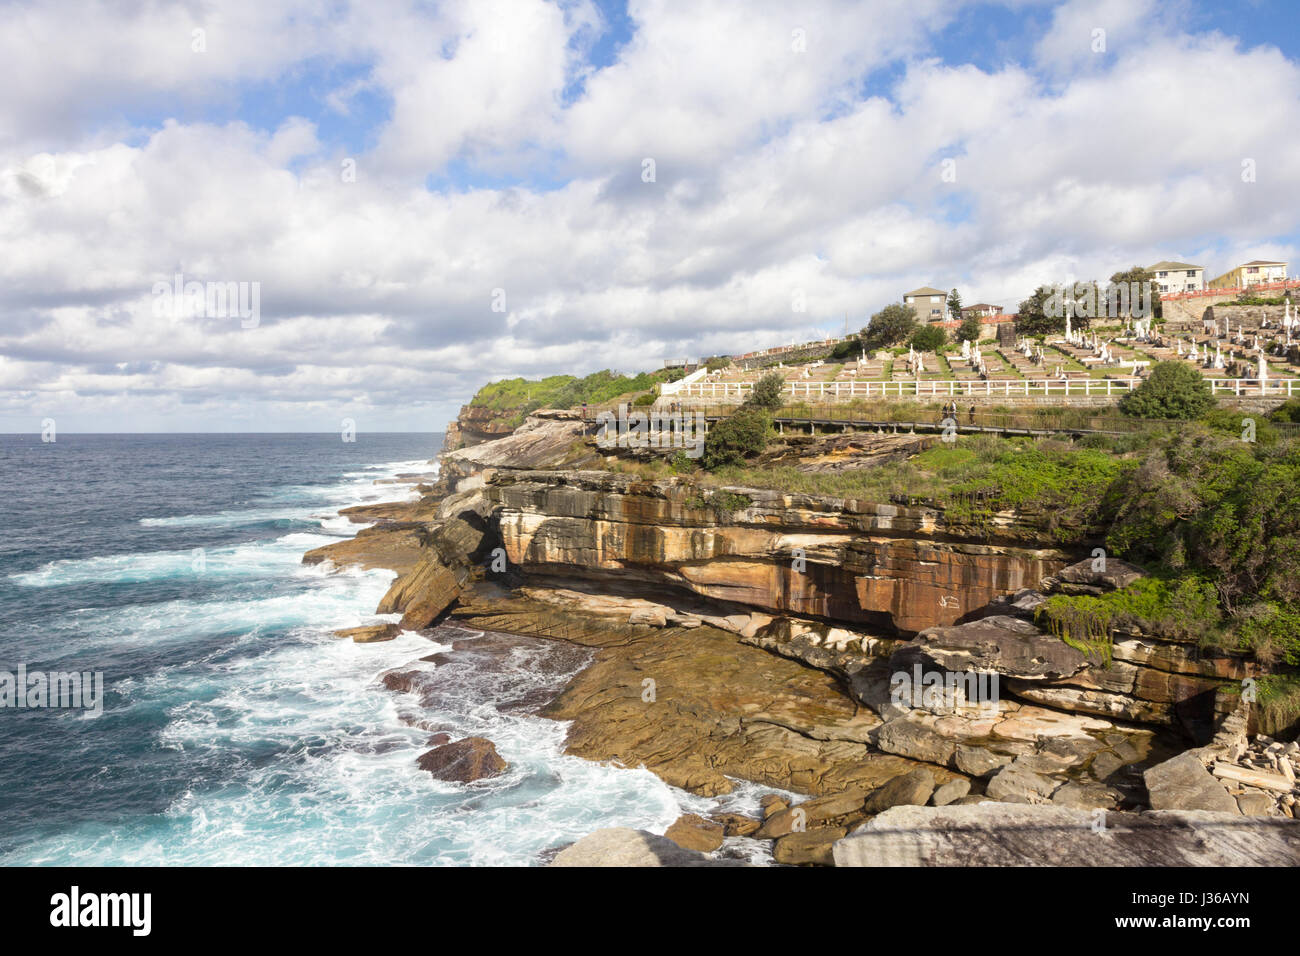 The New South Wales coastline with Waverley cemetery on the cliff, Bronte, Sydney, Australia Stock Photo